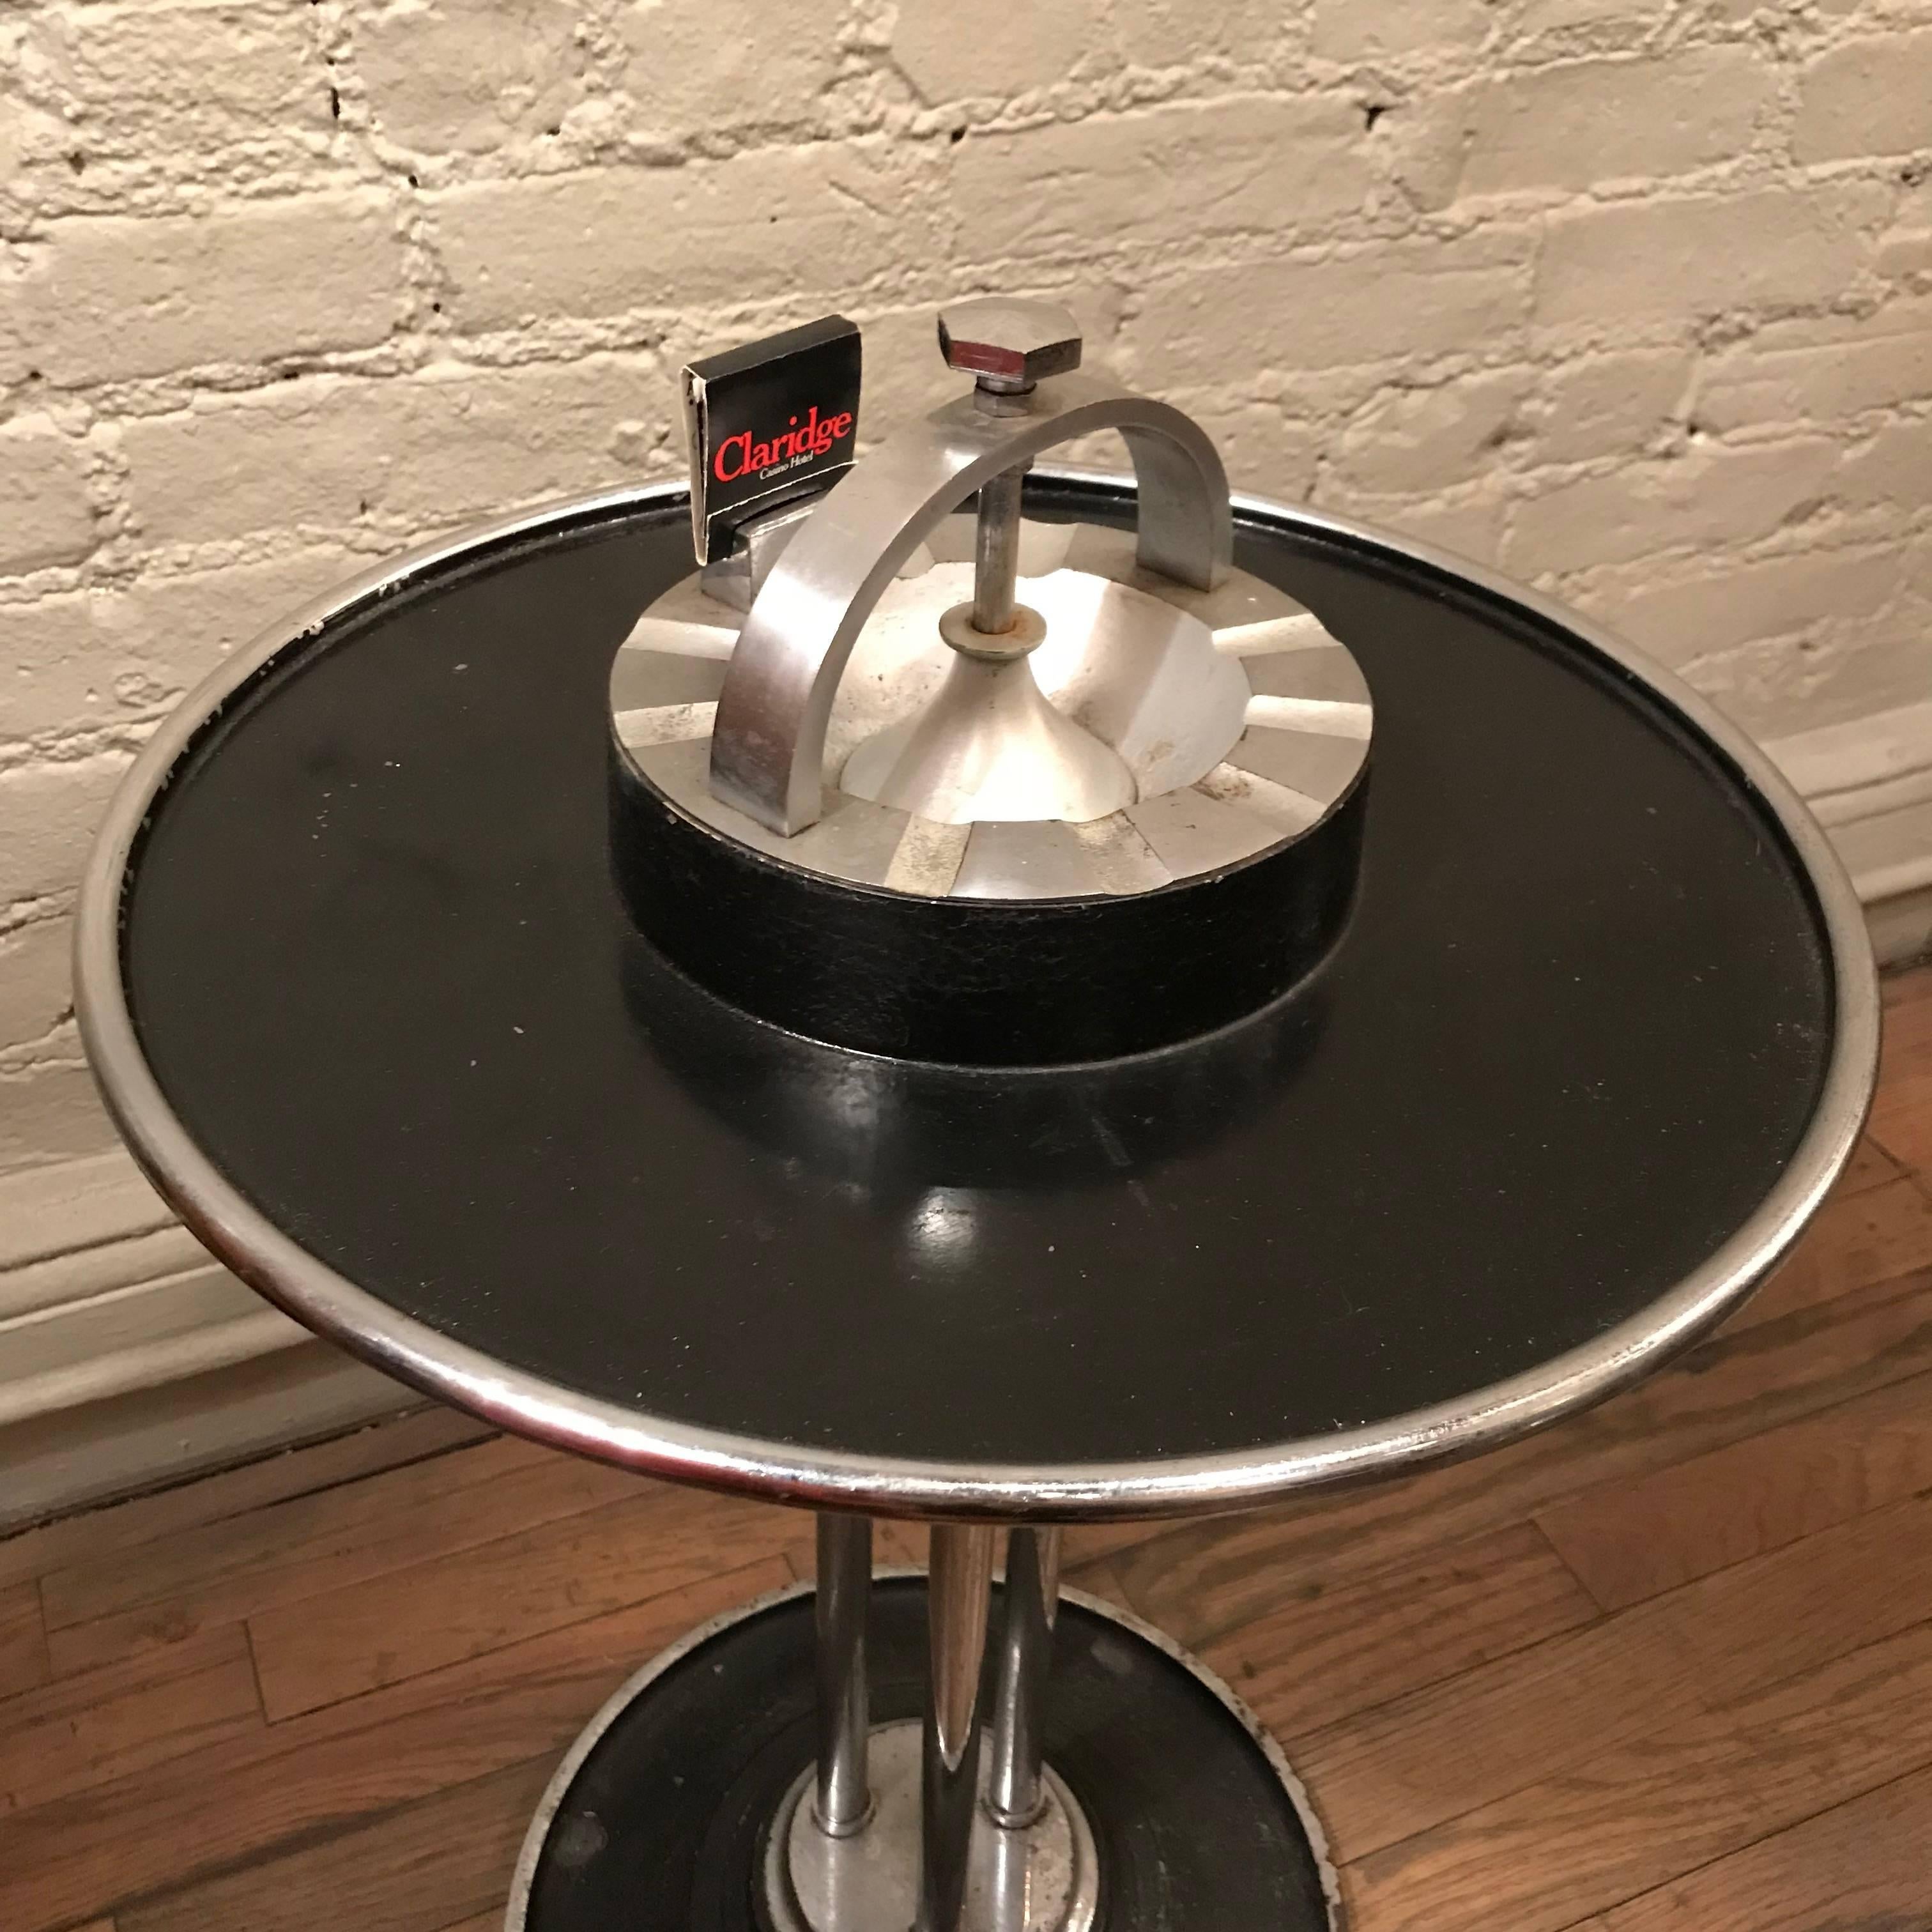 American Climax Streamlined Art Deco Train Car Cocktail Smoker Stand Ashtray Side Table